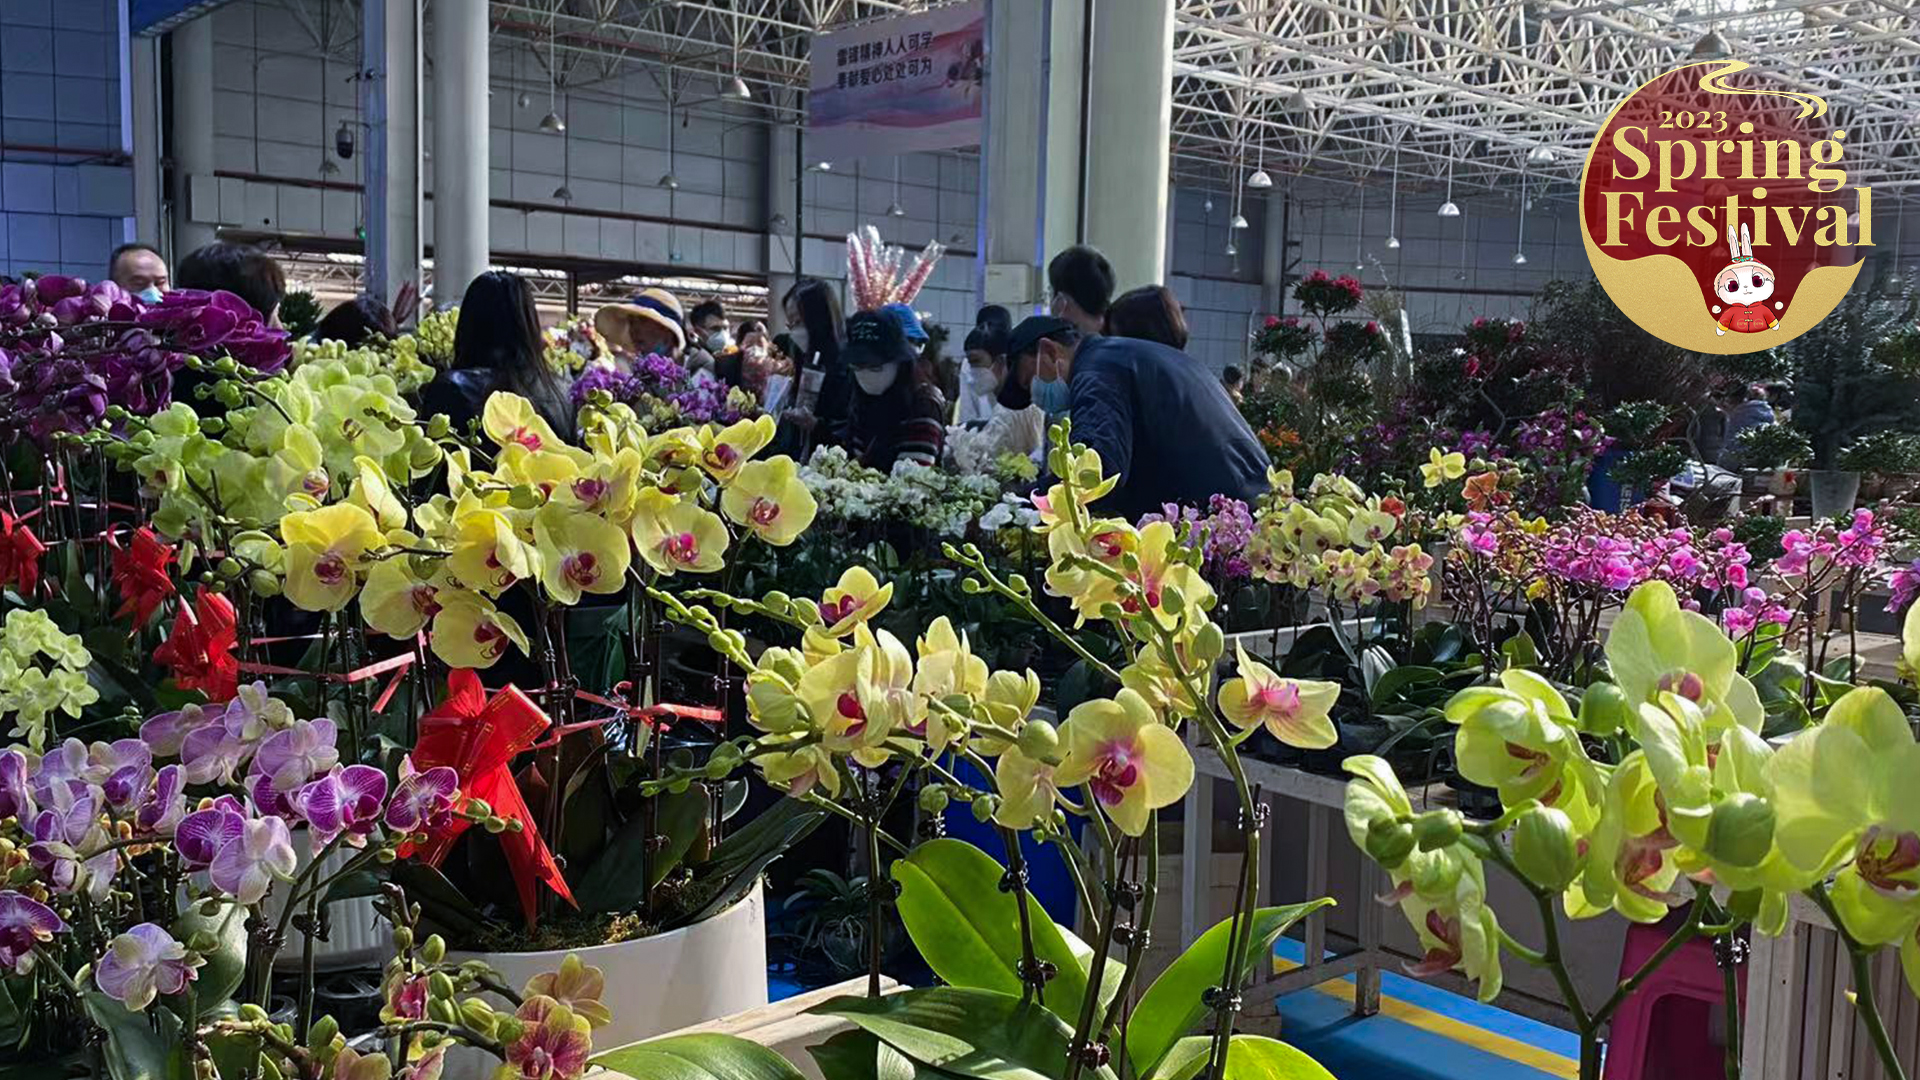 Live: Visiting one of China's largest flower markets ahead of Spring Festival